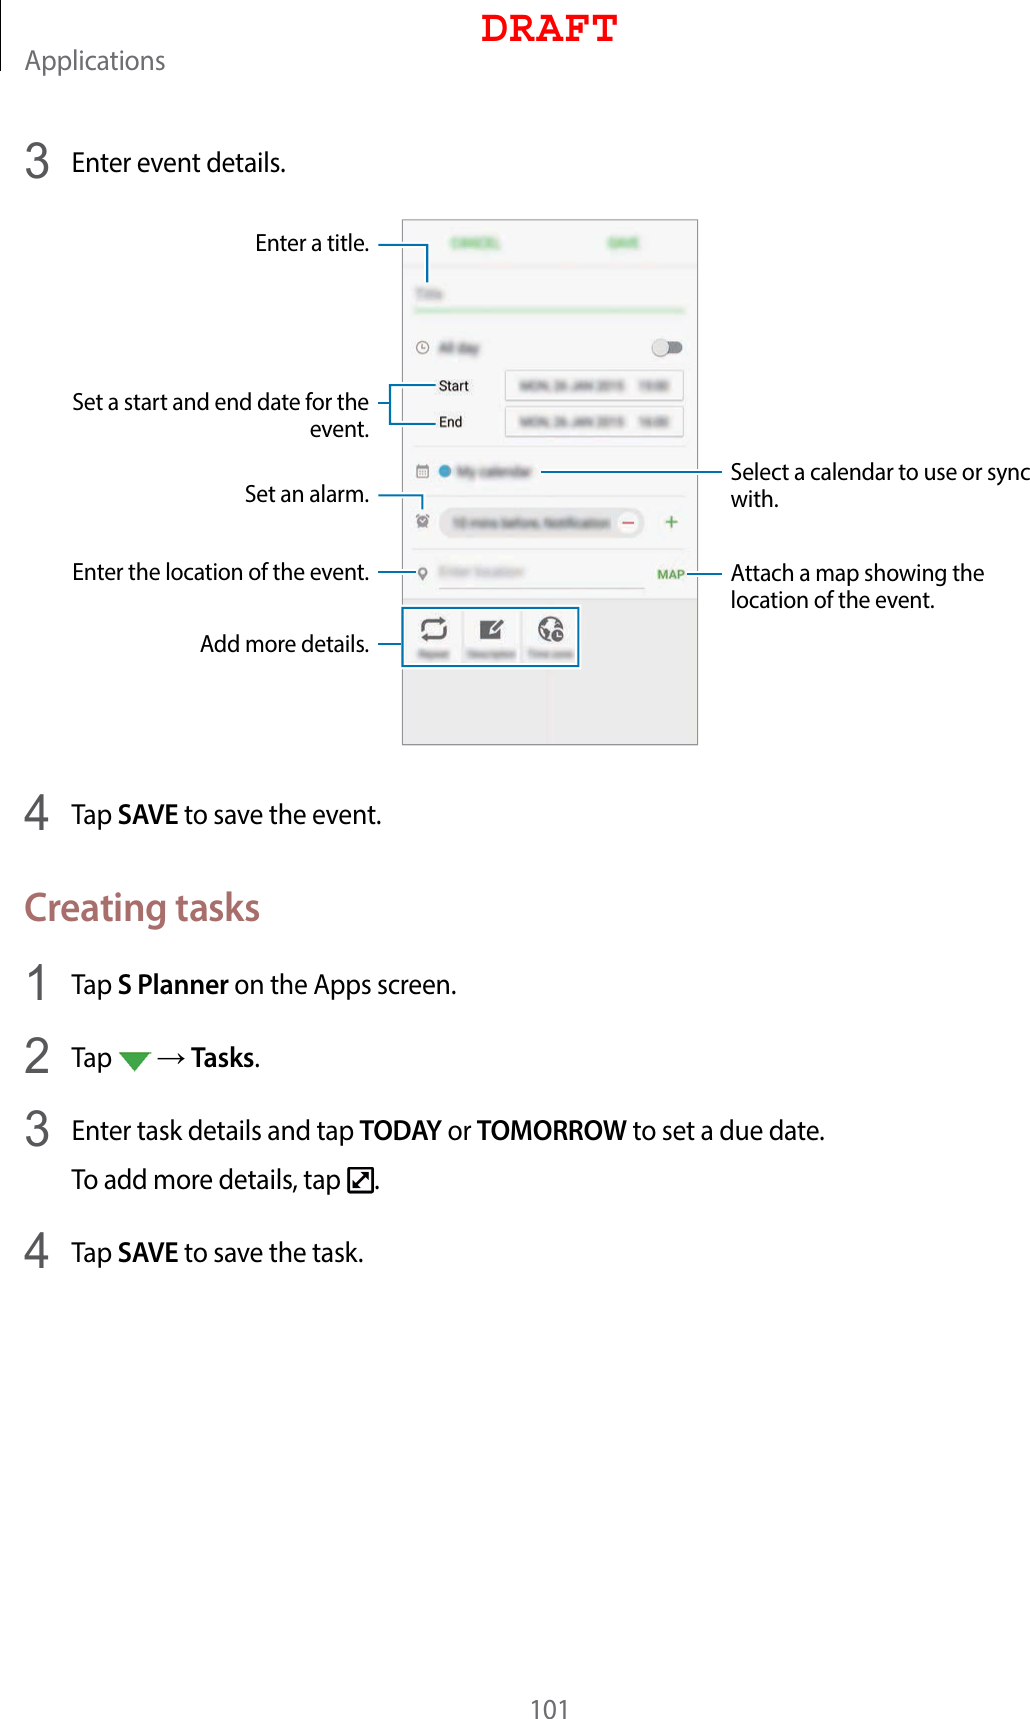 Applications1013  Enter event details.Select a calendar to use or sync with.Attach a map showing the location of the event.Enter the location of the event.Enter a title.Set a start and end date for the event.Add more details.Set an alarm.4  Tap SAVE to save the event.Creating tasks1  Tap S Planner on the Apps screen.2  Tap    Tasks.3  Enter task details and tap TODAY or TOMORROW to set a due date.To add more details, tap  .4  Tap SAVE to save the task.DRAFT